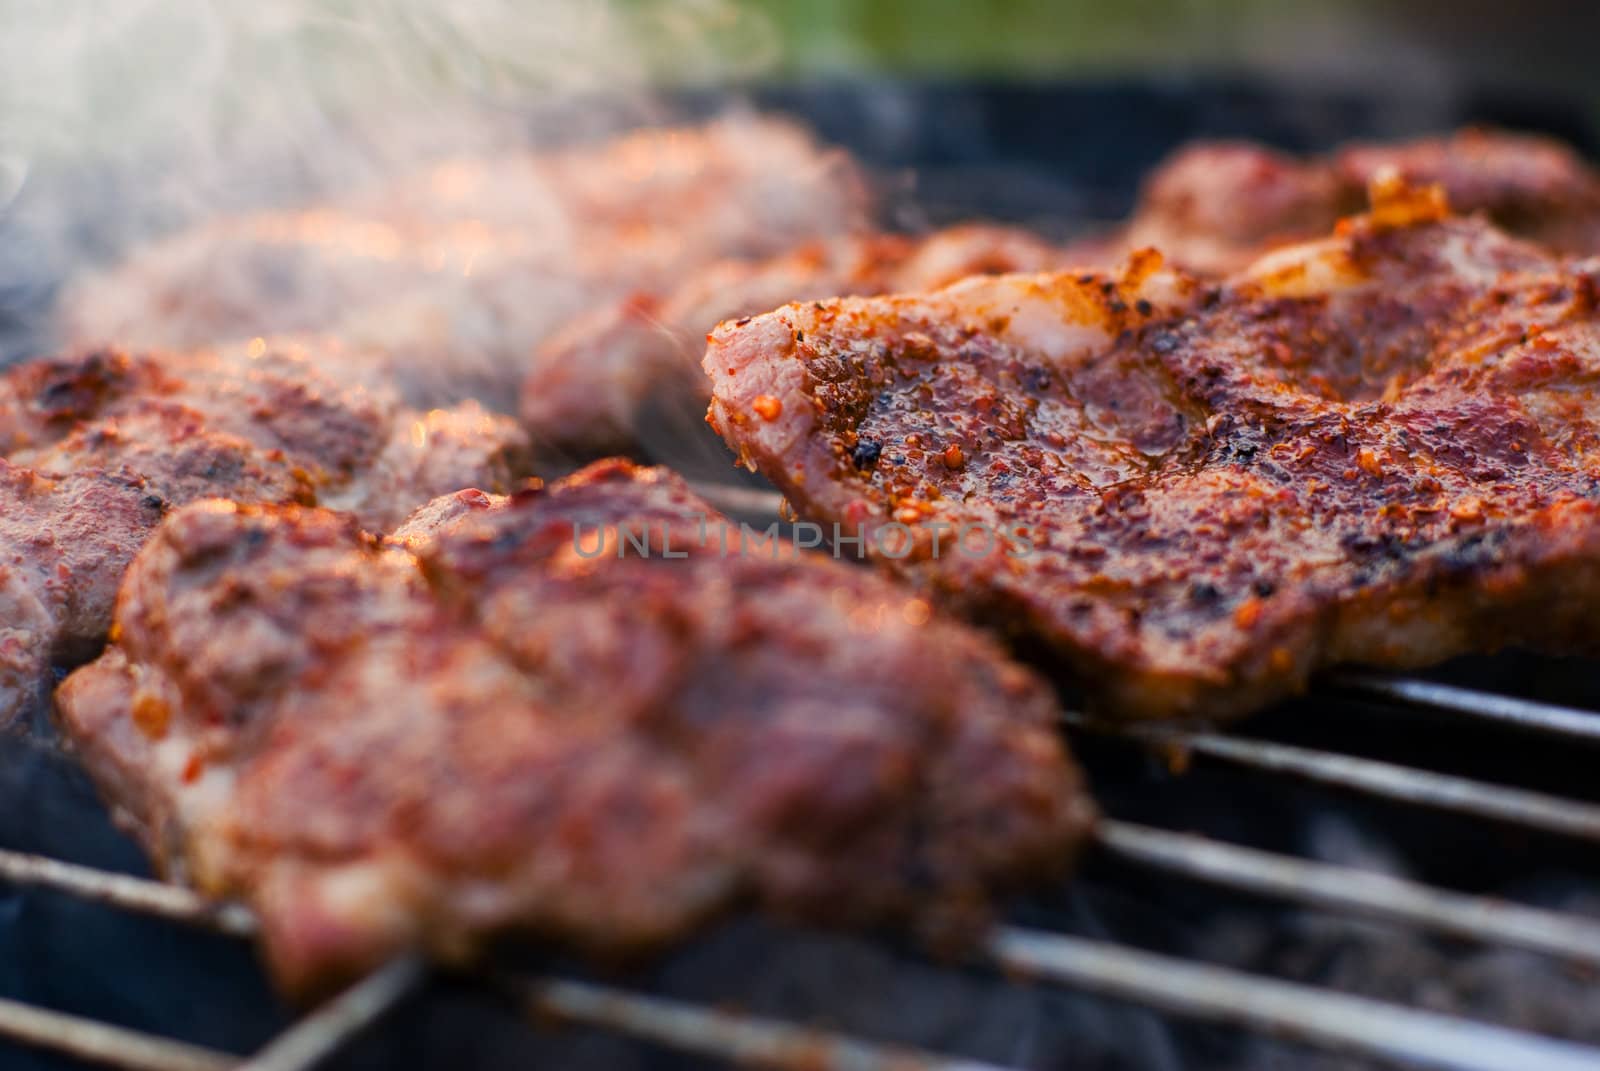 Delicious chuck steaks on the grill. Shallow depth of field.